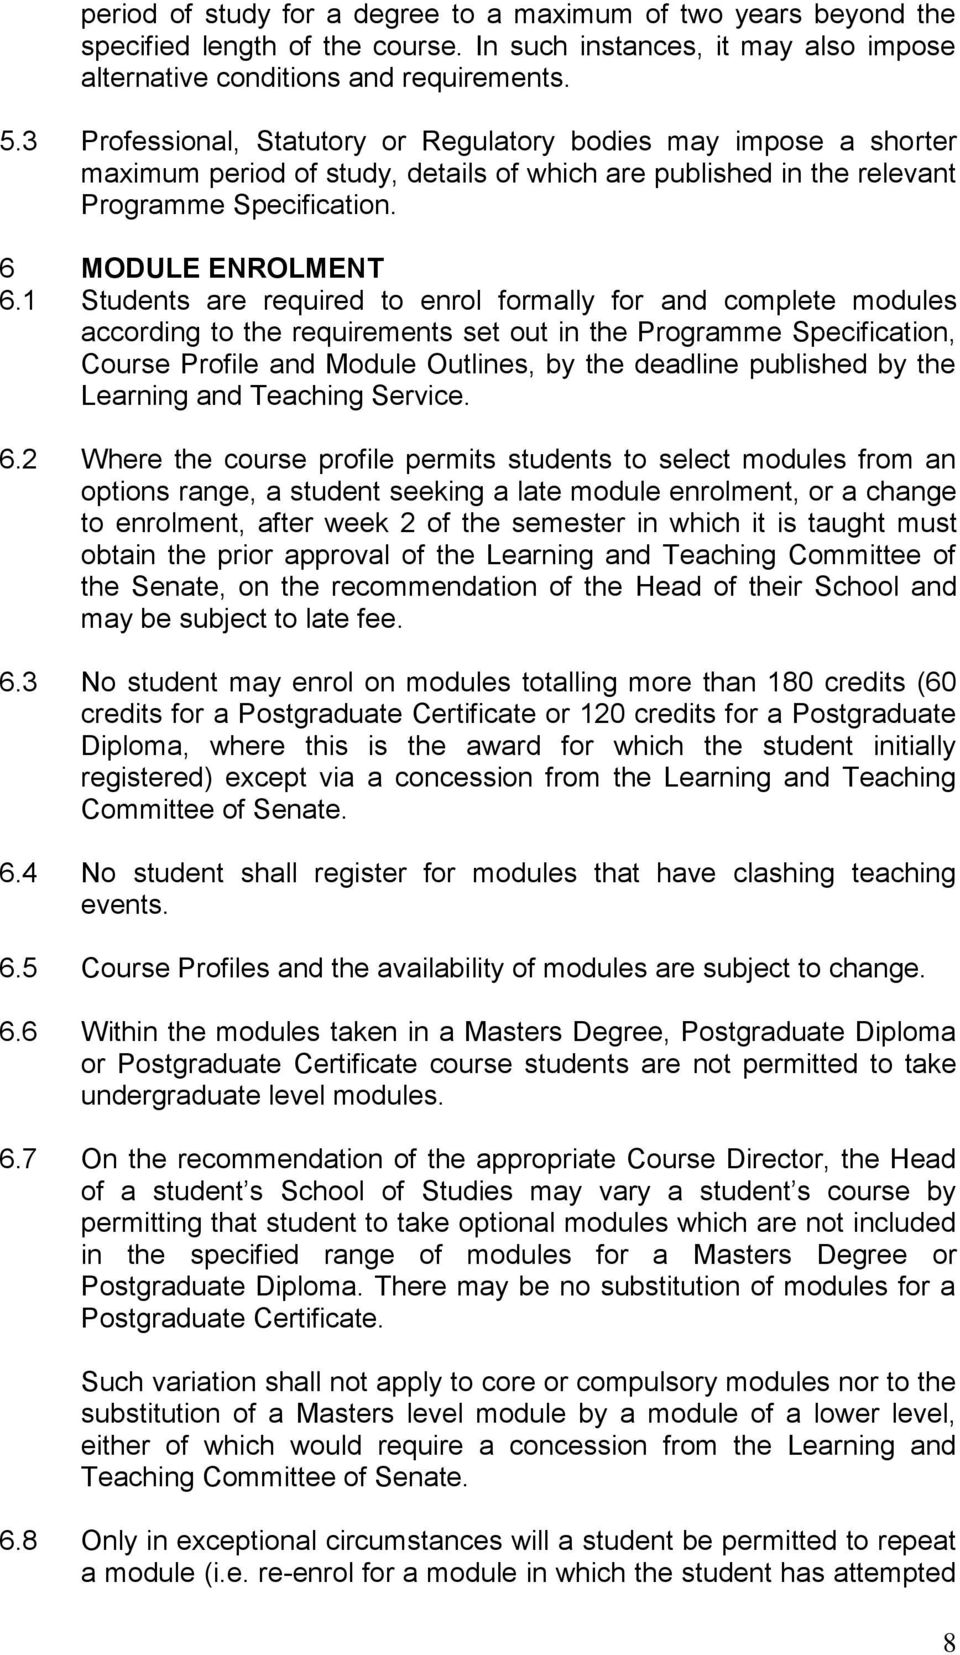 1 Students are required to enrol formally for and complete modules according to the requirements set out in the Programme Specification, Course Profile and Module Outlines, by the deadline published